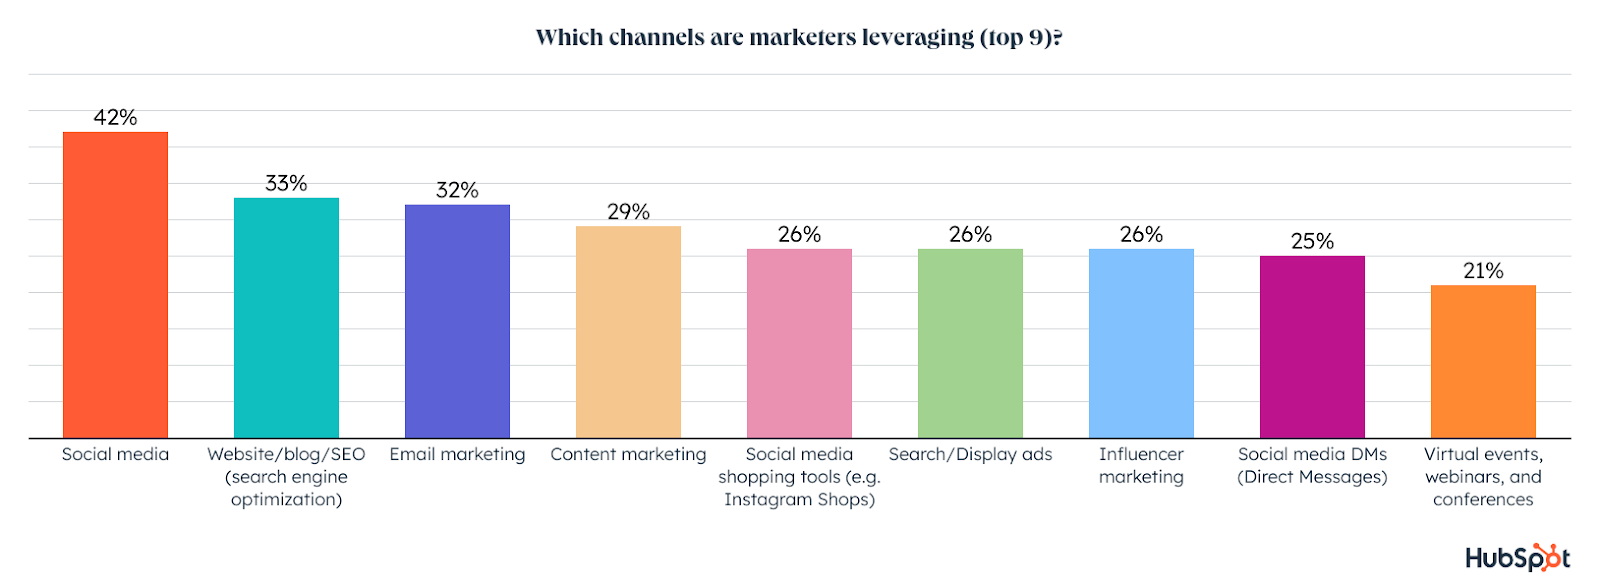 What channels are marketers leveraging